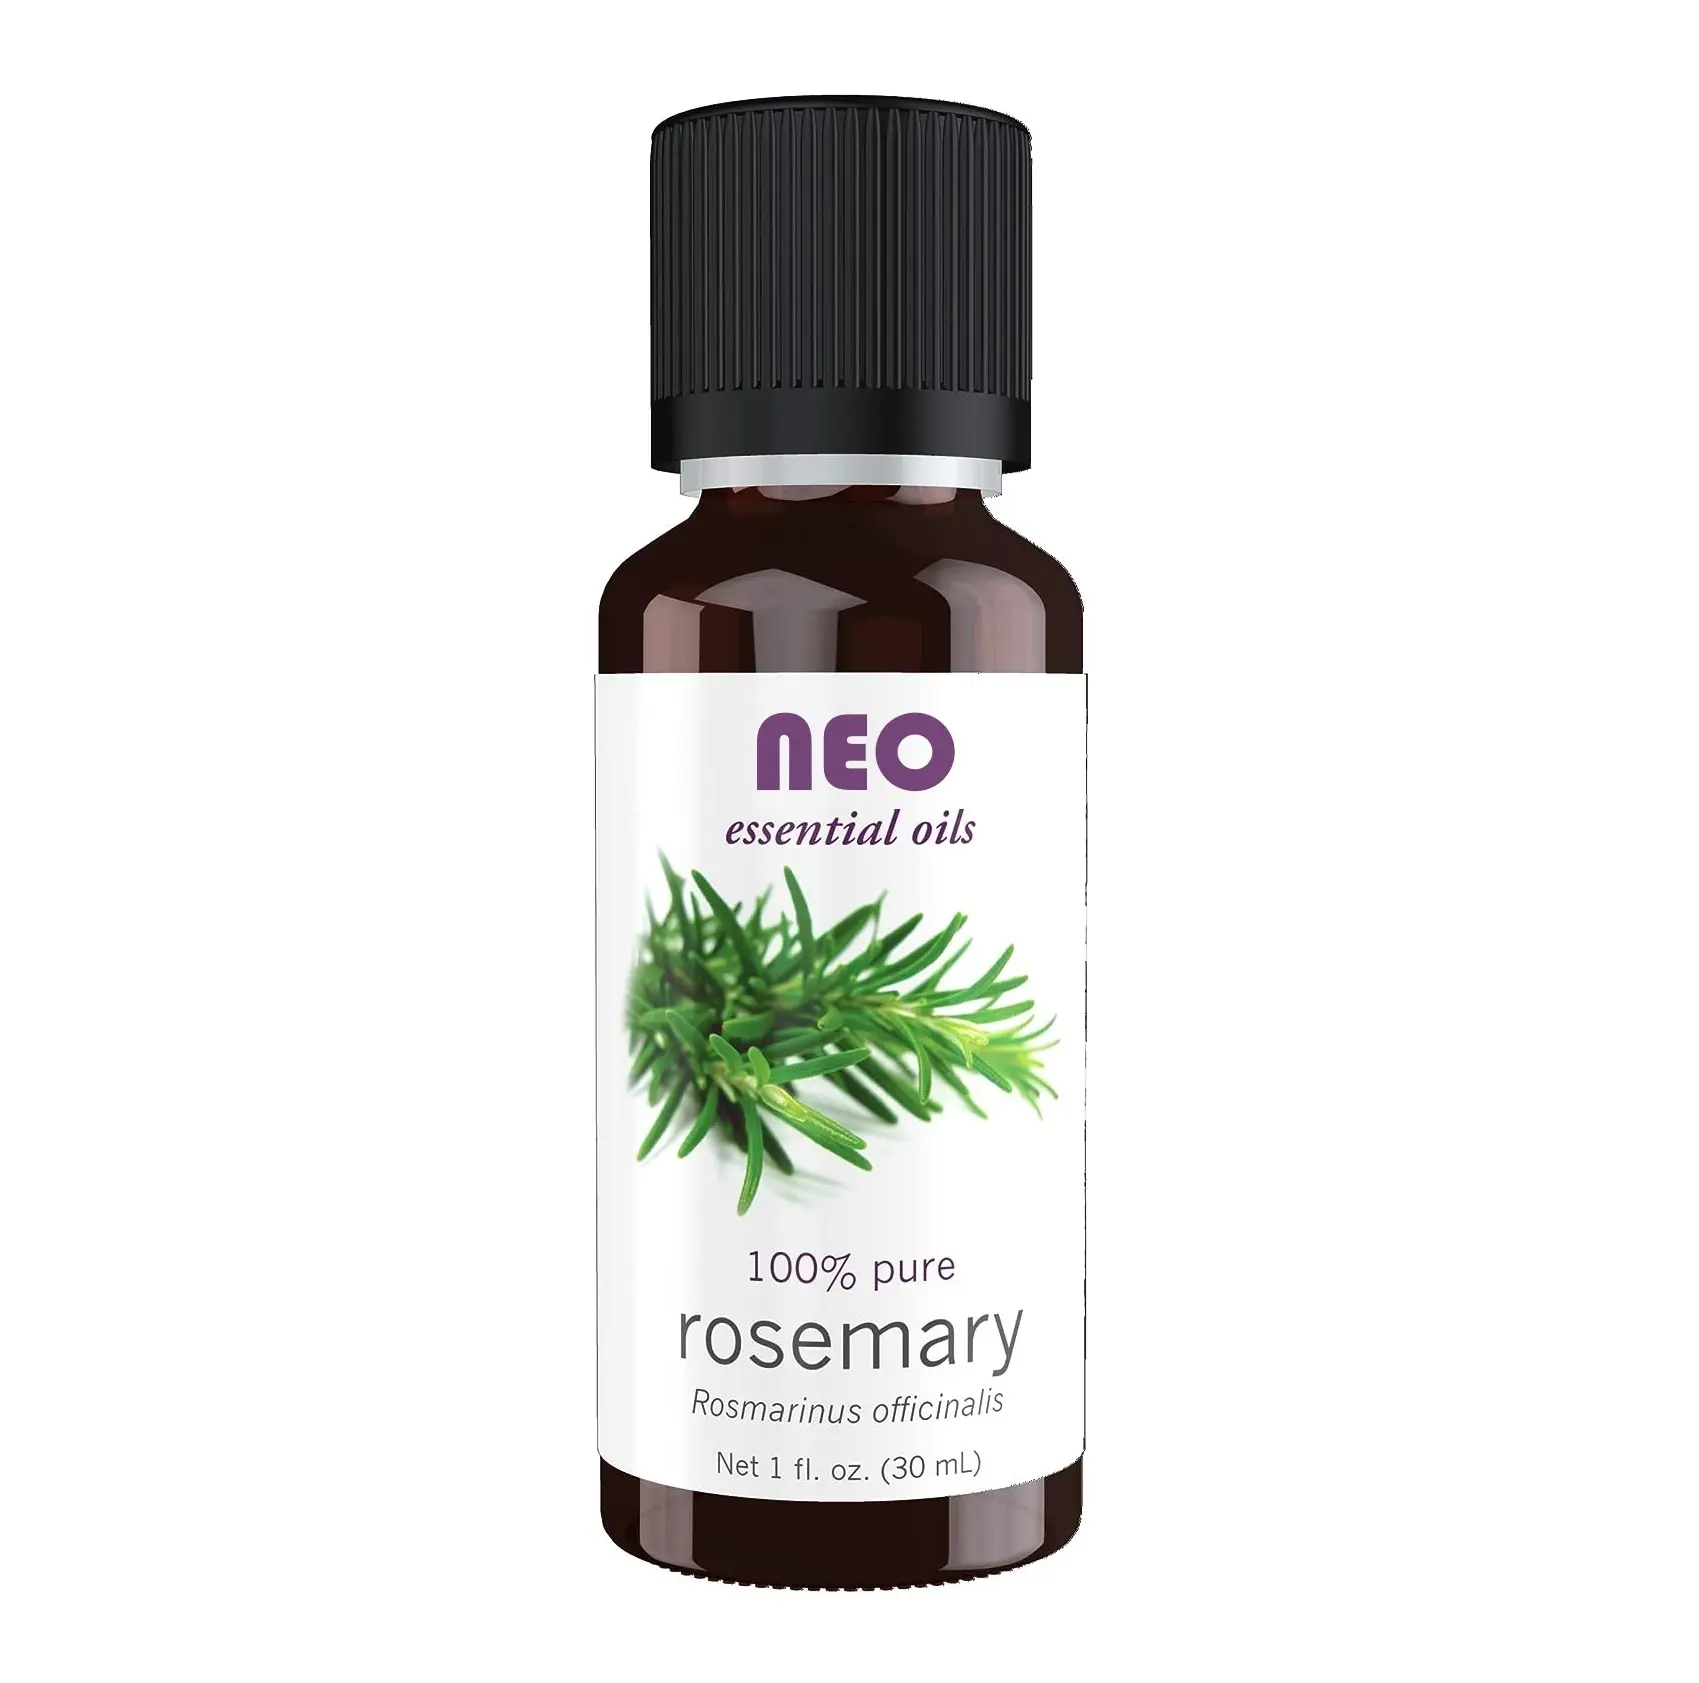 Highly Concentrated Pure Rosemary 1 oz 30 mL For Aromatherapy Use Undiluted Naturally Sourced Essential Oil